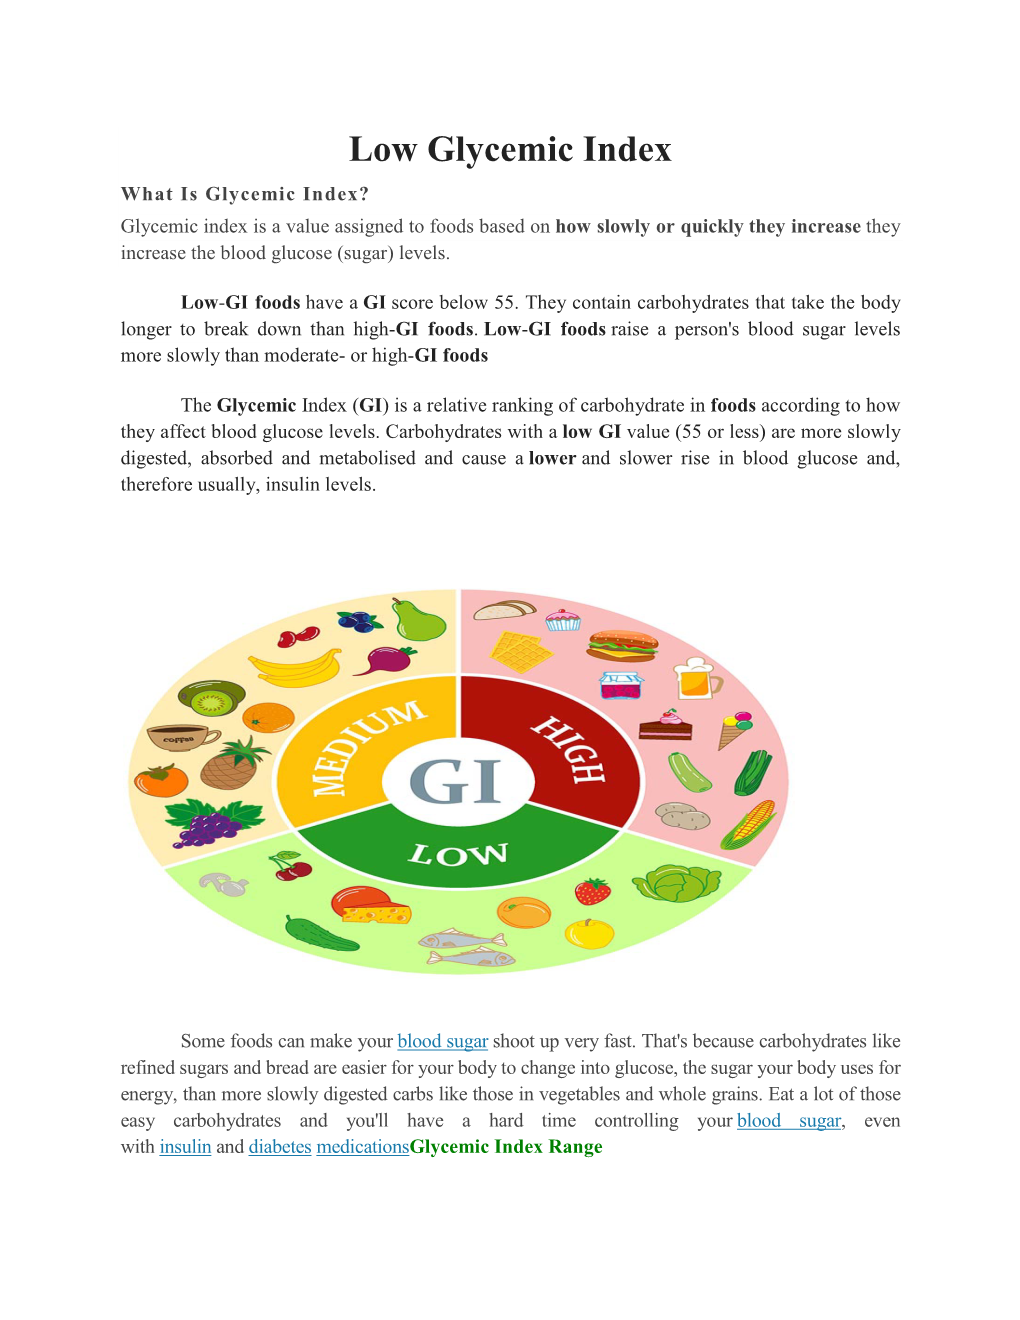 Low Glycemic Index Foods (Free Foods / Eat Freely/ Consume Frequently)